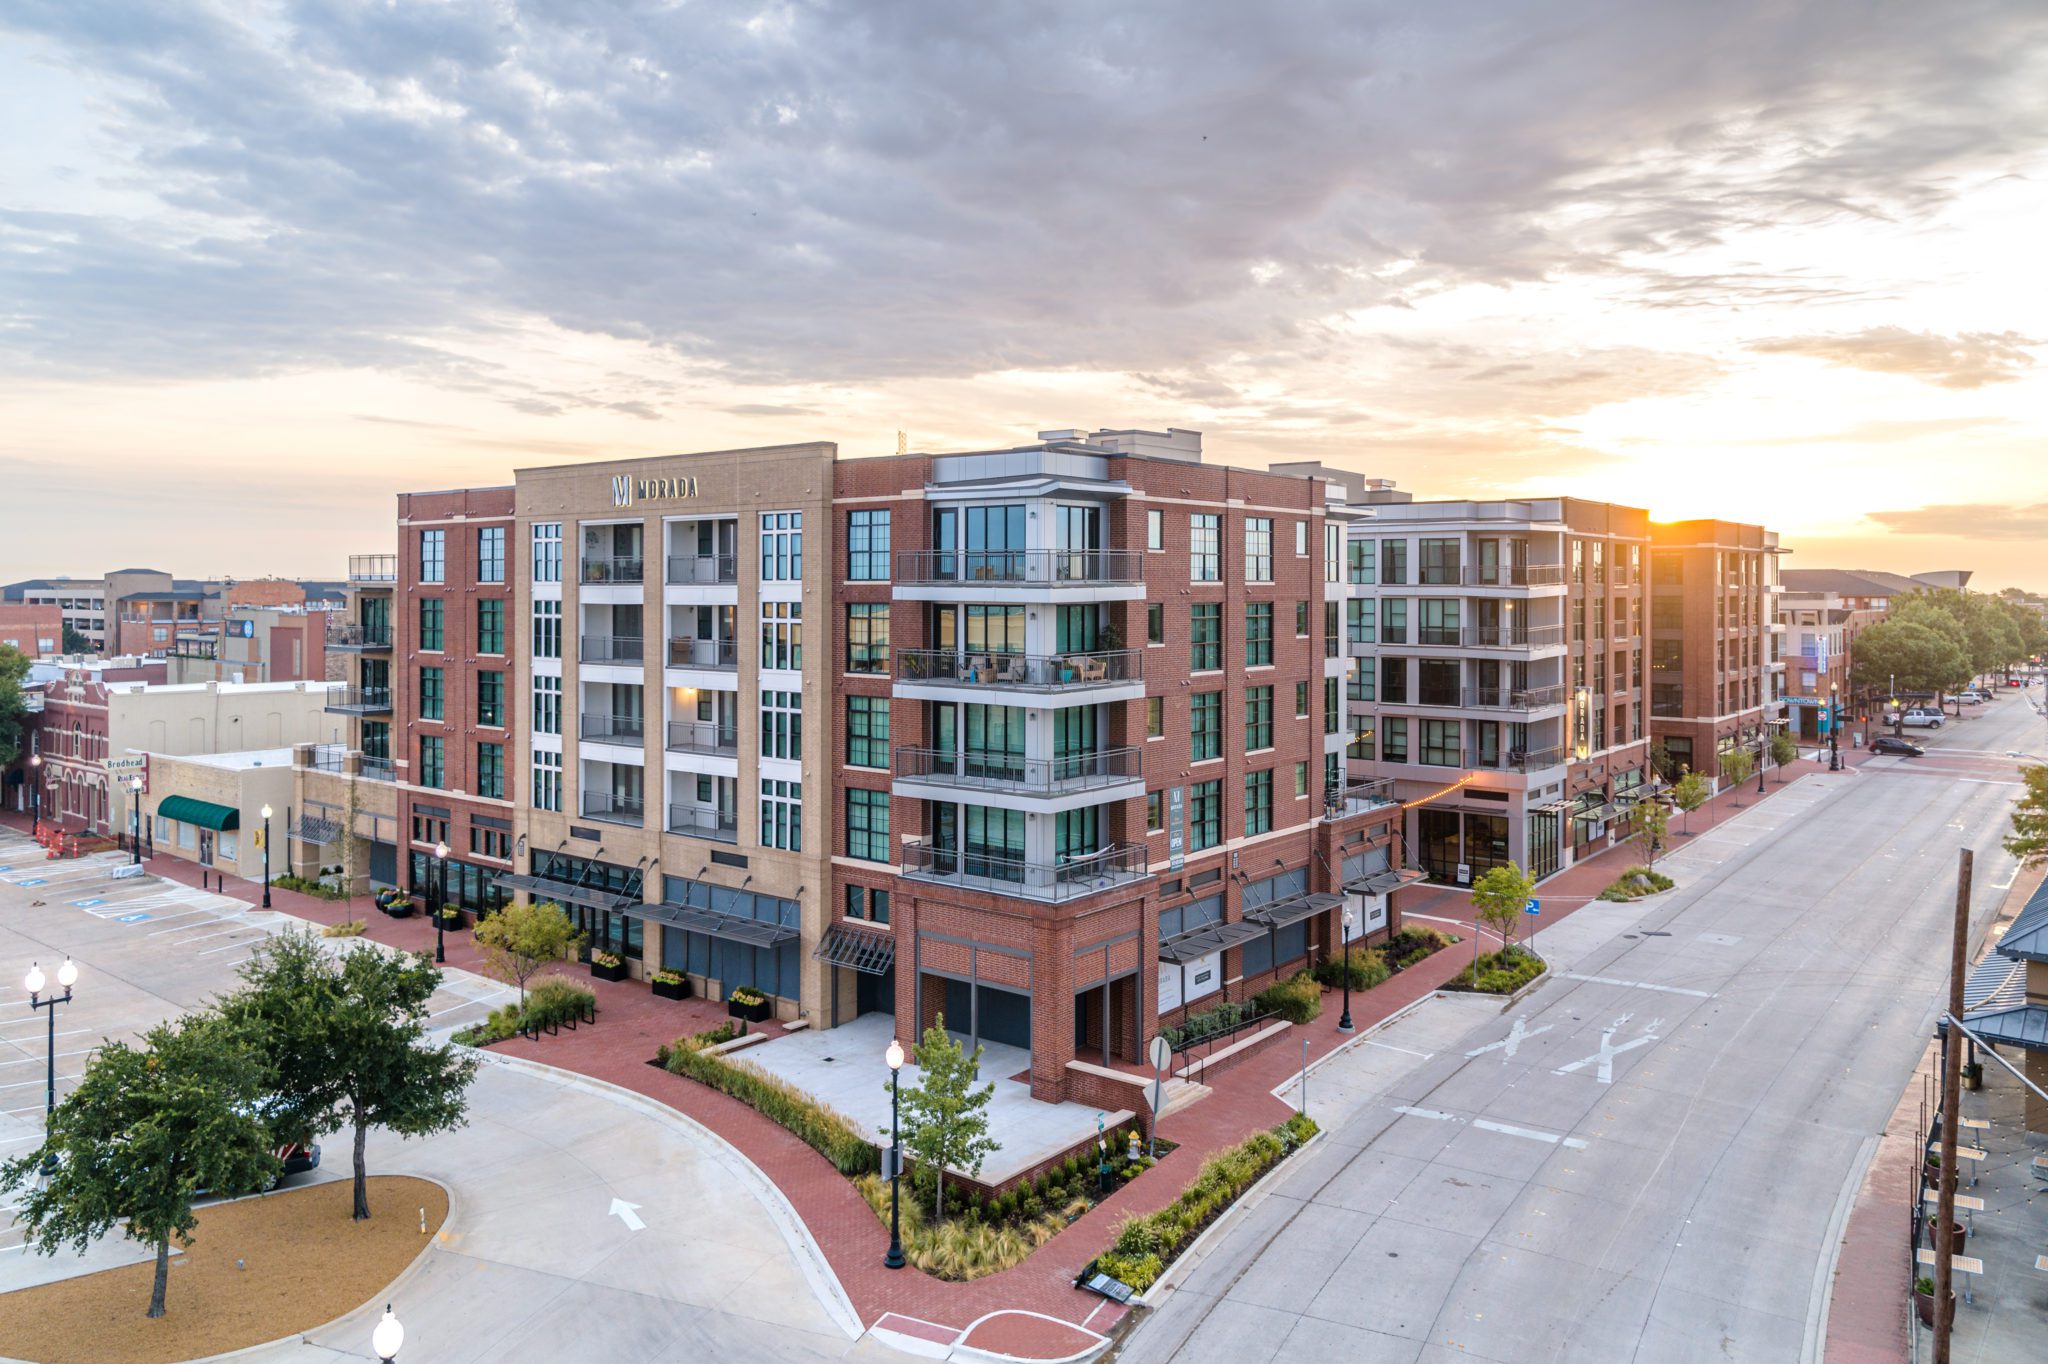 Morada Plano Retail and Apartment Project Bought by California Investor